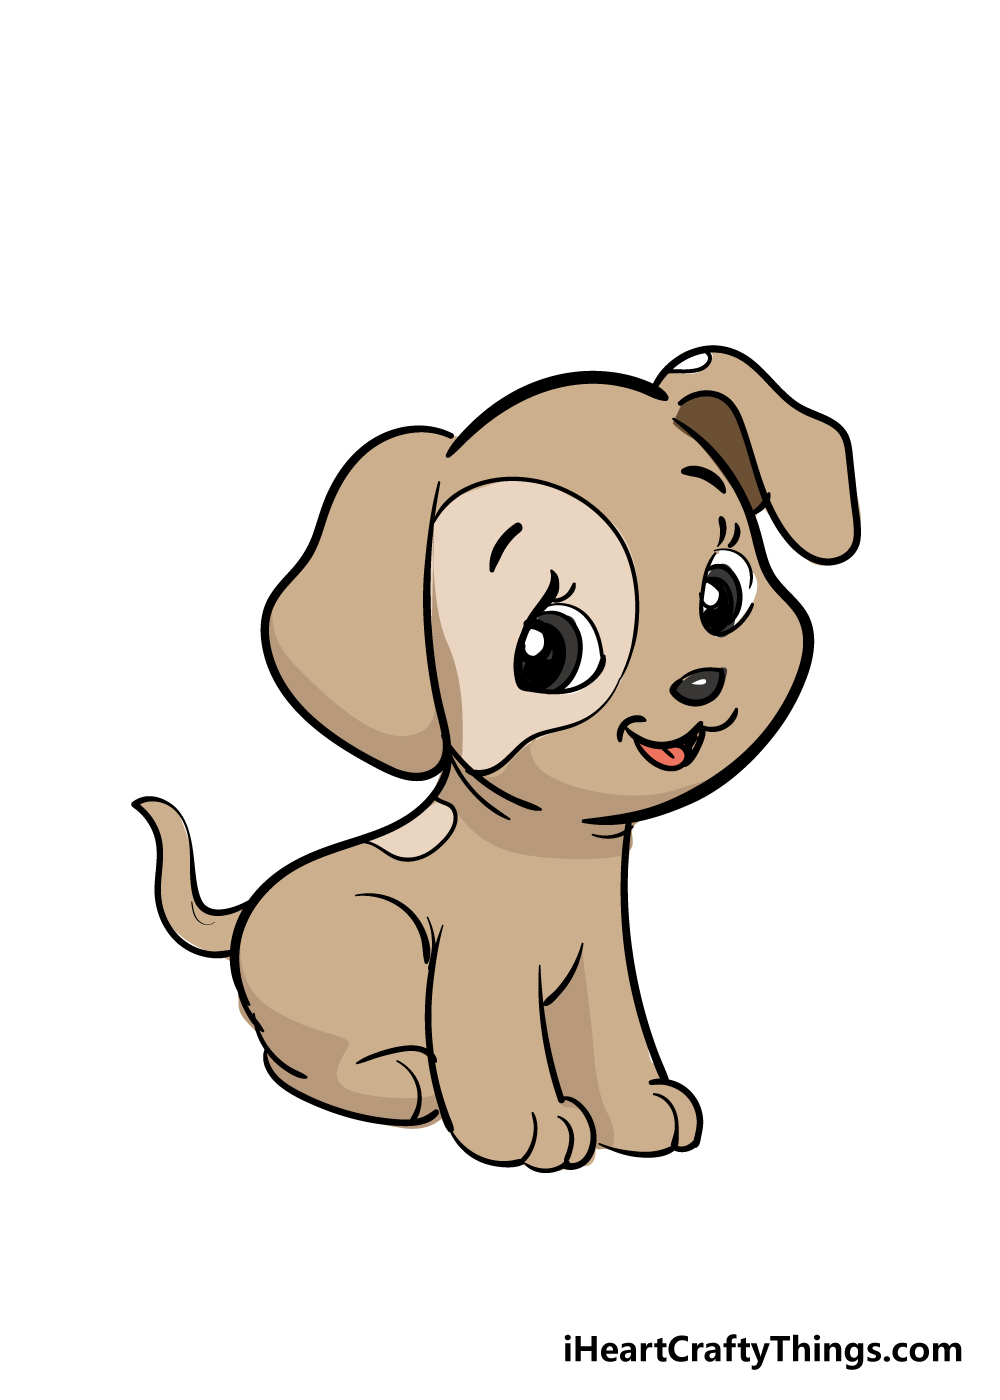 Puppy Drawing - How To Draw A Puppy Step By Step